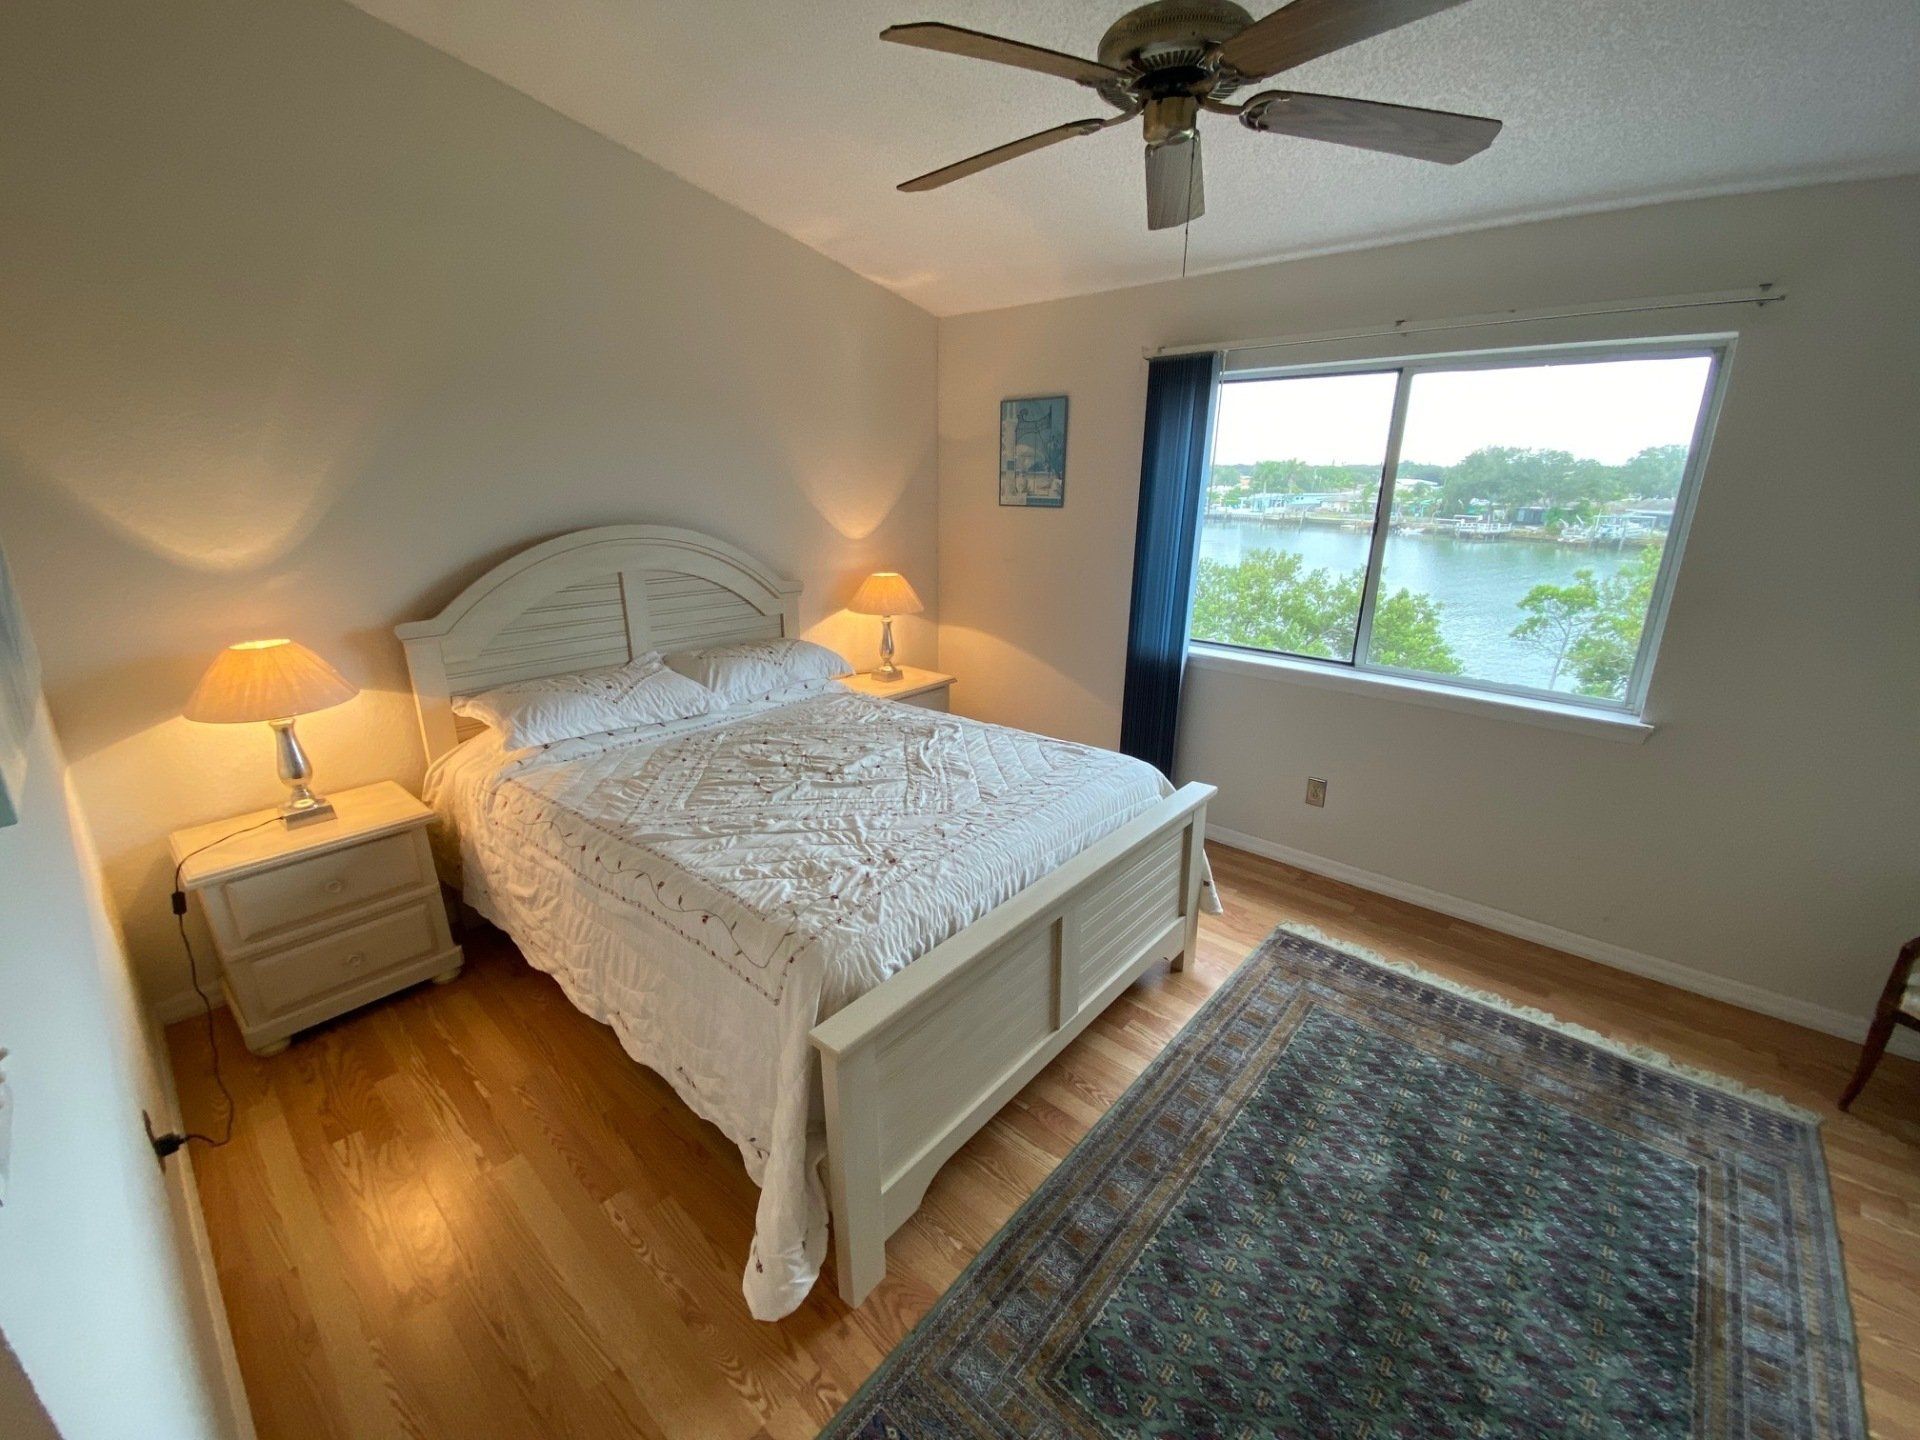 Queen bed with white wood frame, white bed cover, side tables and 2 lamps, blue window shade and Intracoastal view